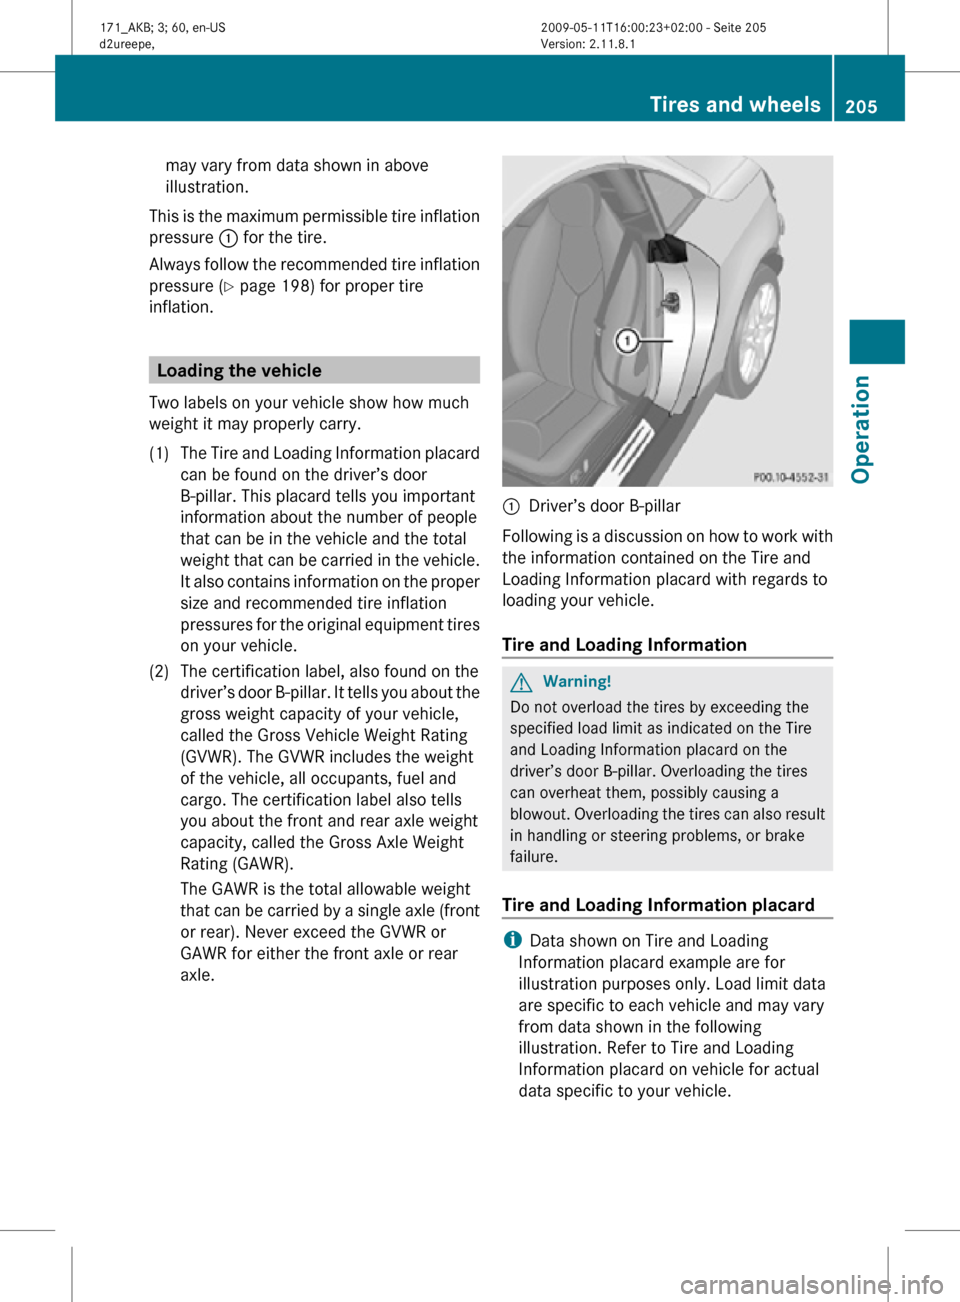 MERCEDES-BENZ SLK300 2011 R170 Owners Manual may vary from data shown in above
illustration.
This is the maximum permissible tire inflation
pressure  : for the tire.
Always follow the recommended tire inflation
pressure ( Y page 198) for proper 